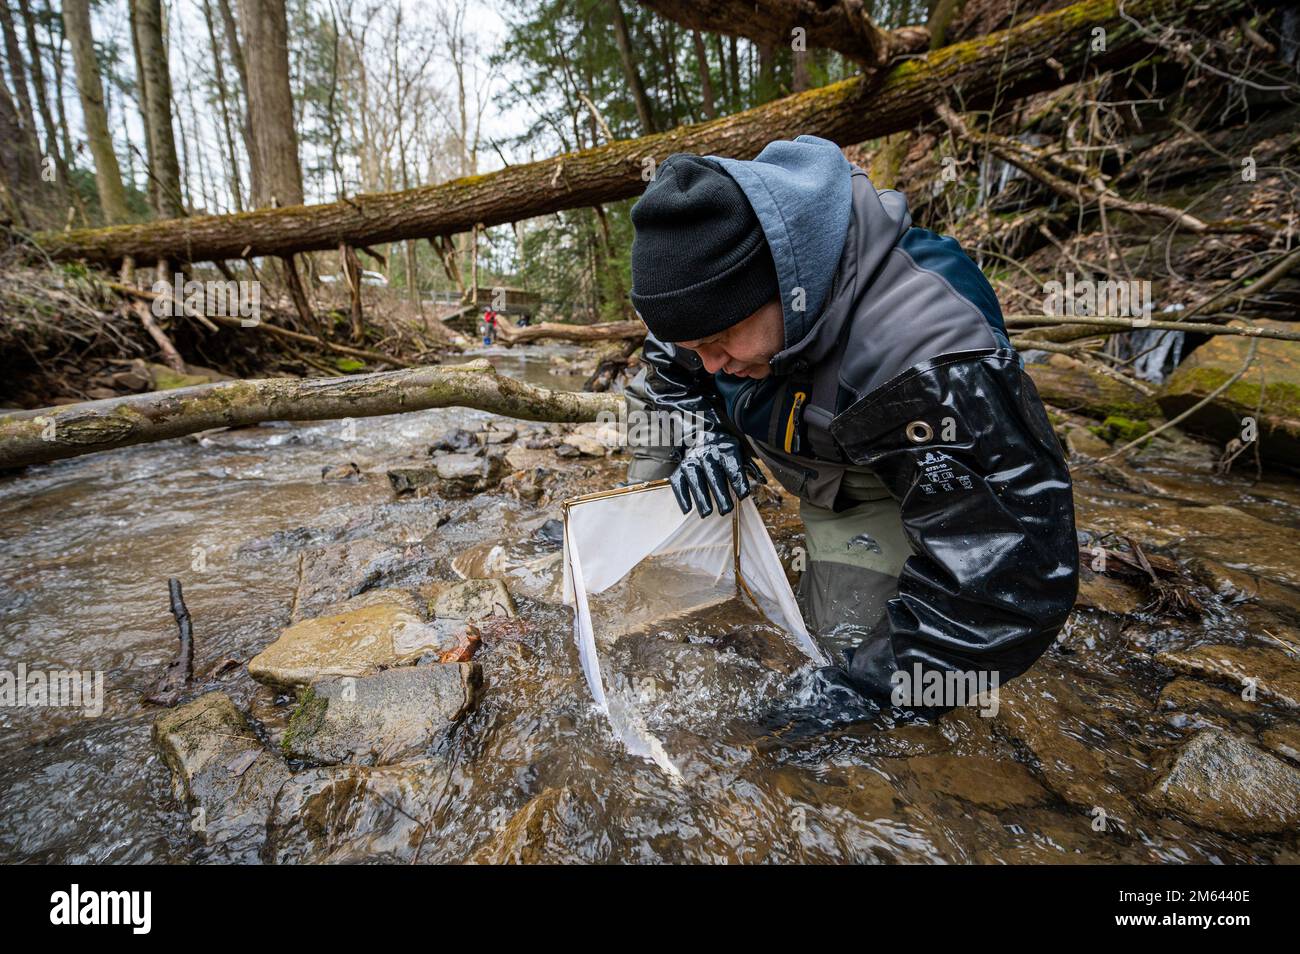 Tony Honick, a biologist with the water quality team for the U.S. Army Corps of Engineers Pittsburgh District, collects water samples and surveys macroinvertebrates in a tributary flowing into Crooked Creek Lake located near Ford City, Pennsylvania, March 30, 2022. The water quality team collects samples around the various reservoirs belonging to the Pittsburgh District every spring to determine the water quality in the region. Stock Photo